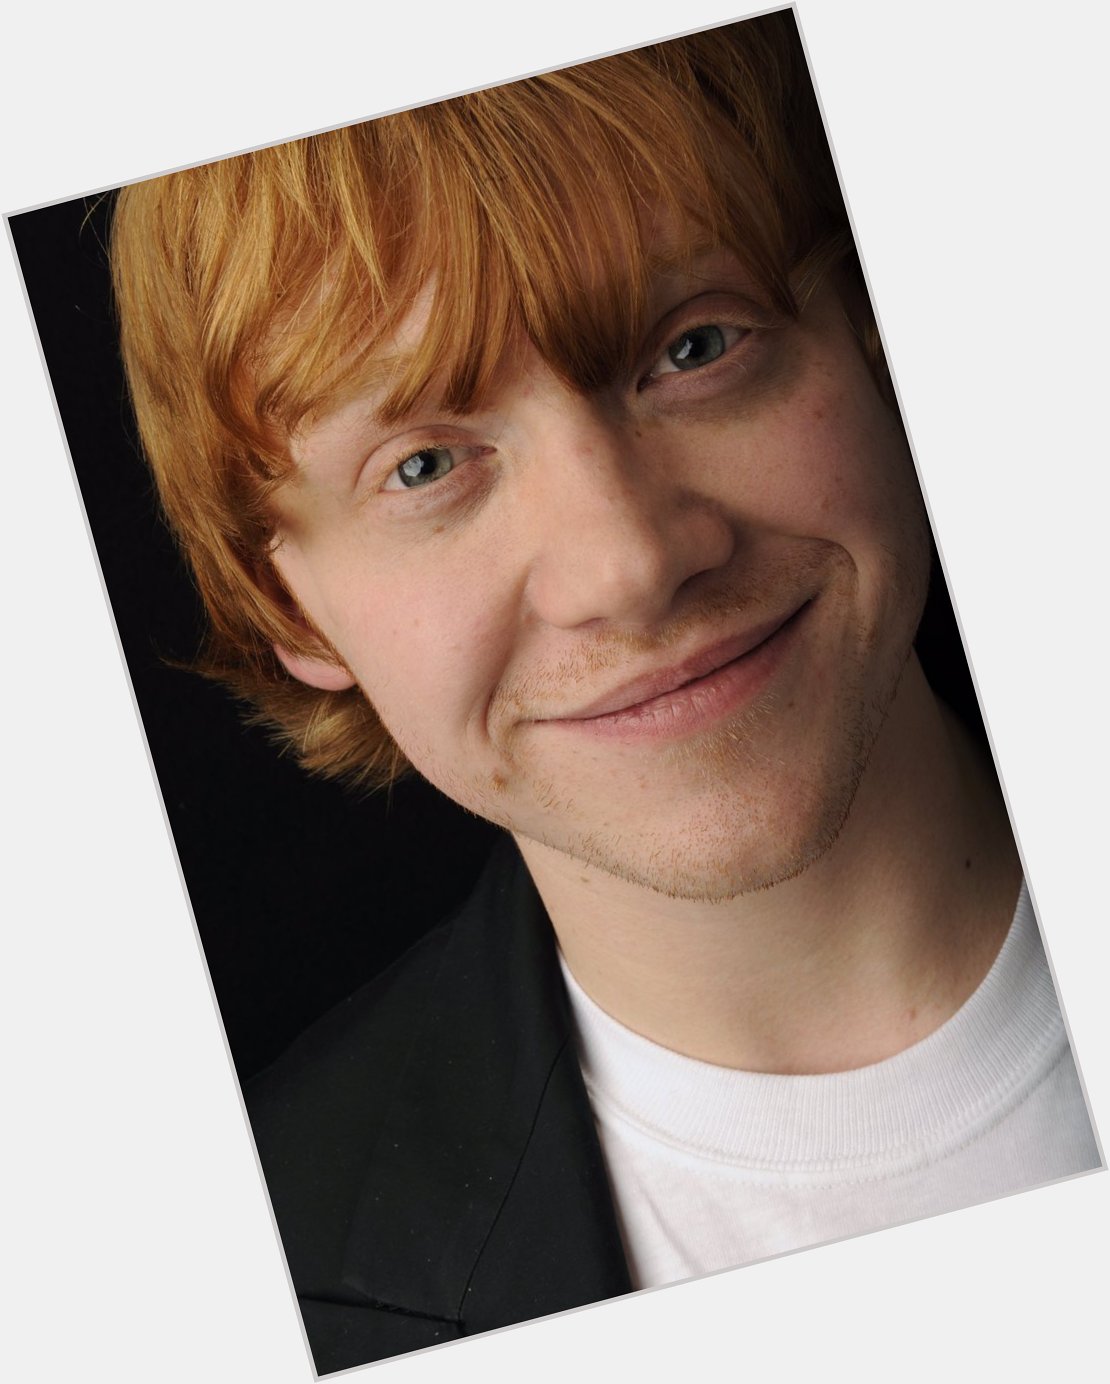 Join us in wishing a very happy birthday to Rupert Grint!   